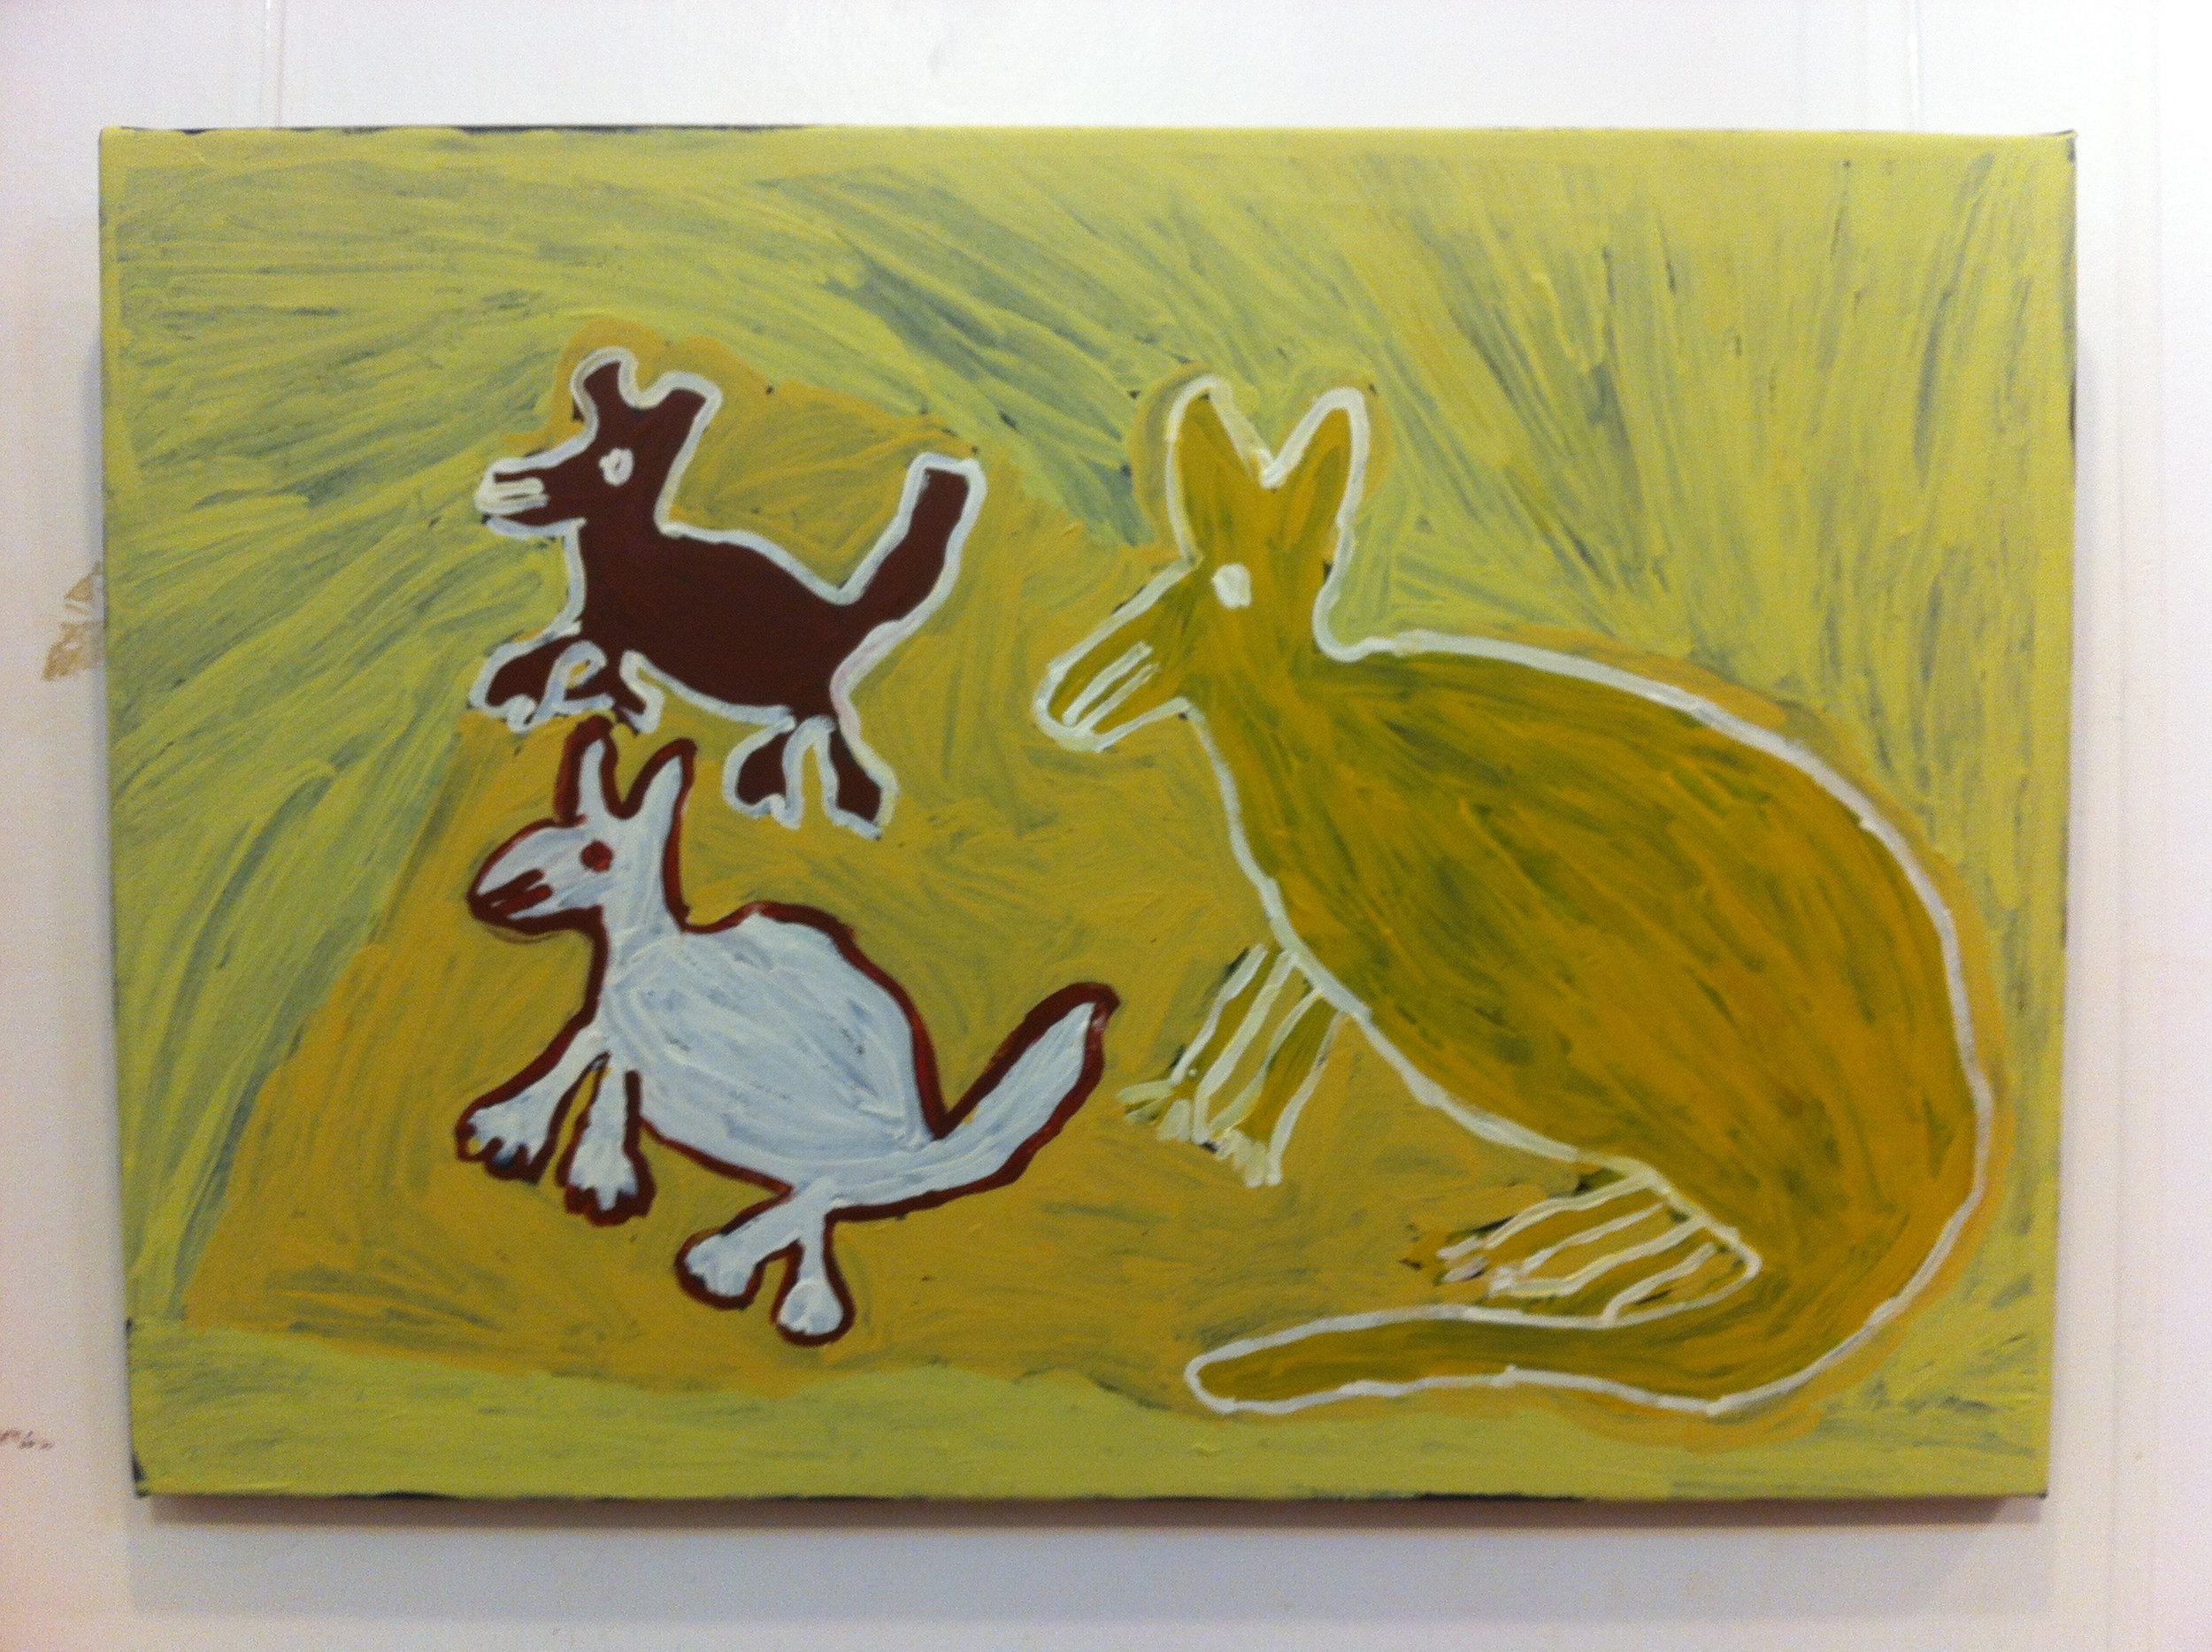  Ruth Lulwarriwuy,  Three Dogs and Waterhole,  synthetic polymer paint on canvas, 60 x 90 cm. 